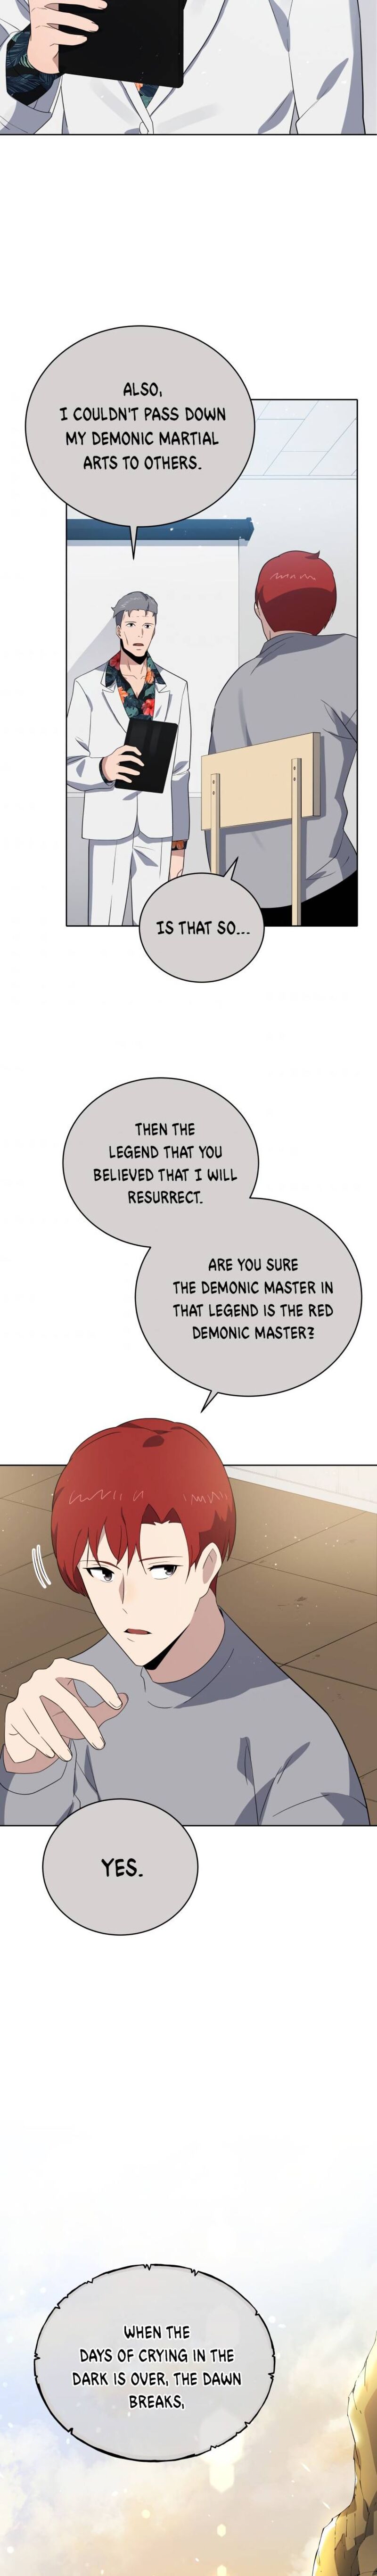 The Descent Of The Demonic Master 133 2